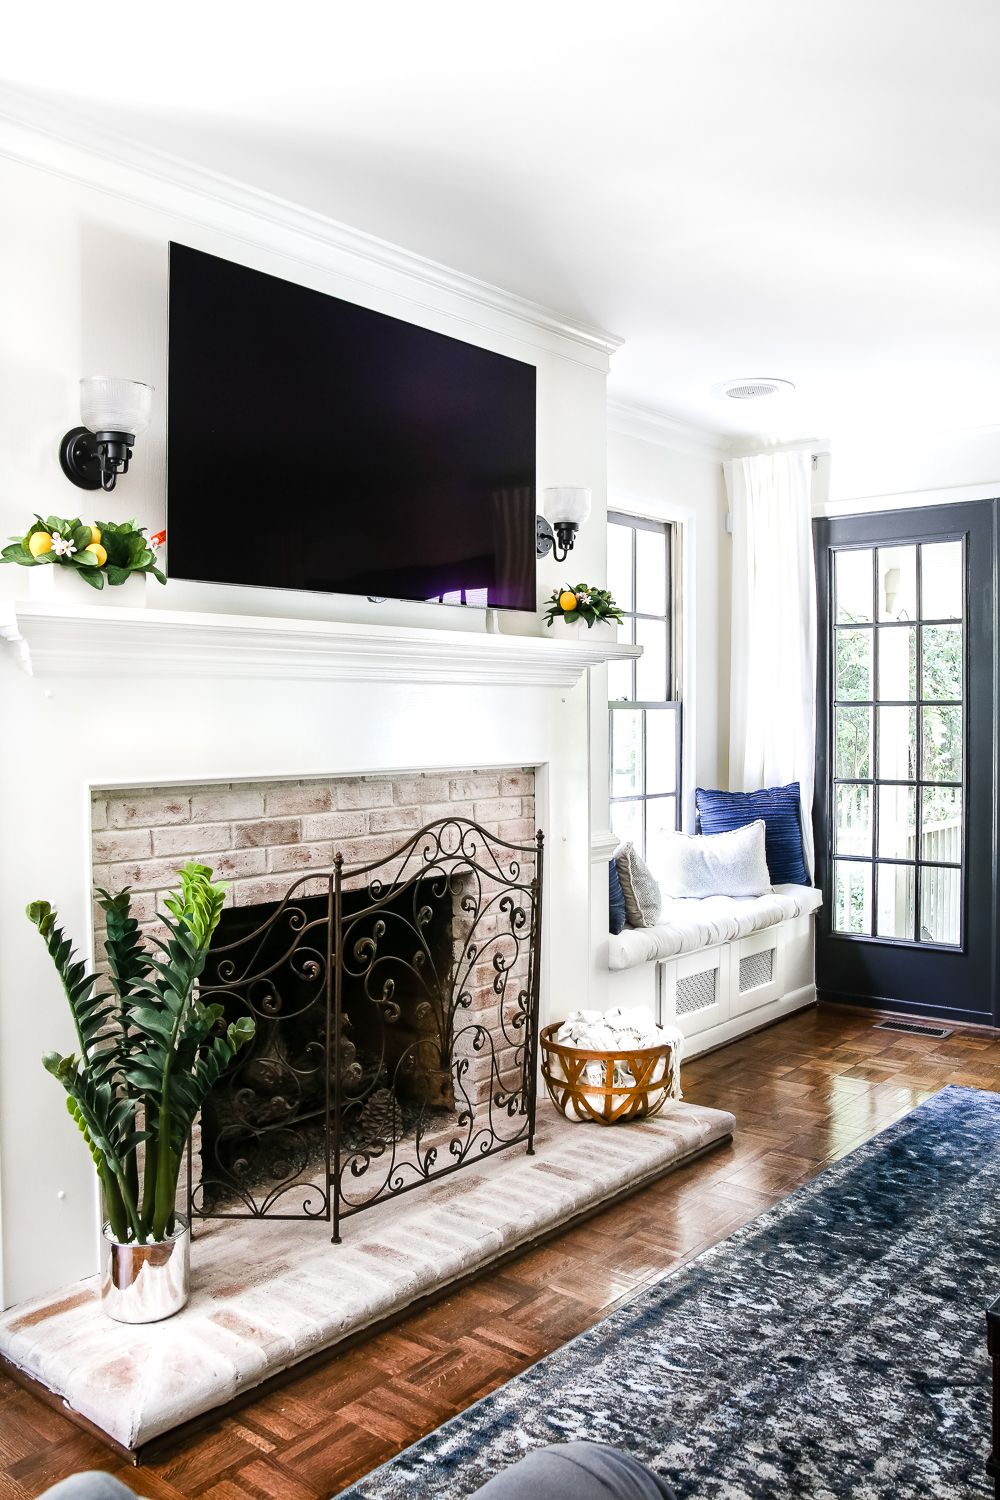 7 Tips for Decorating a Mantel with a Television - Love & Renovations